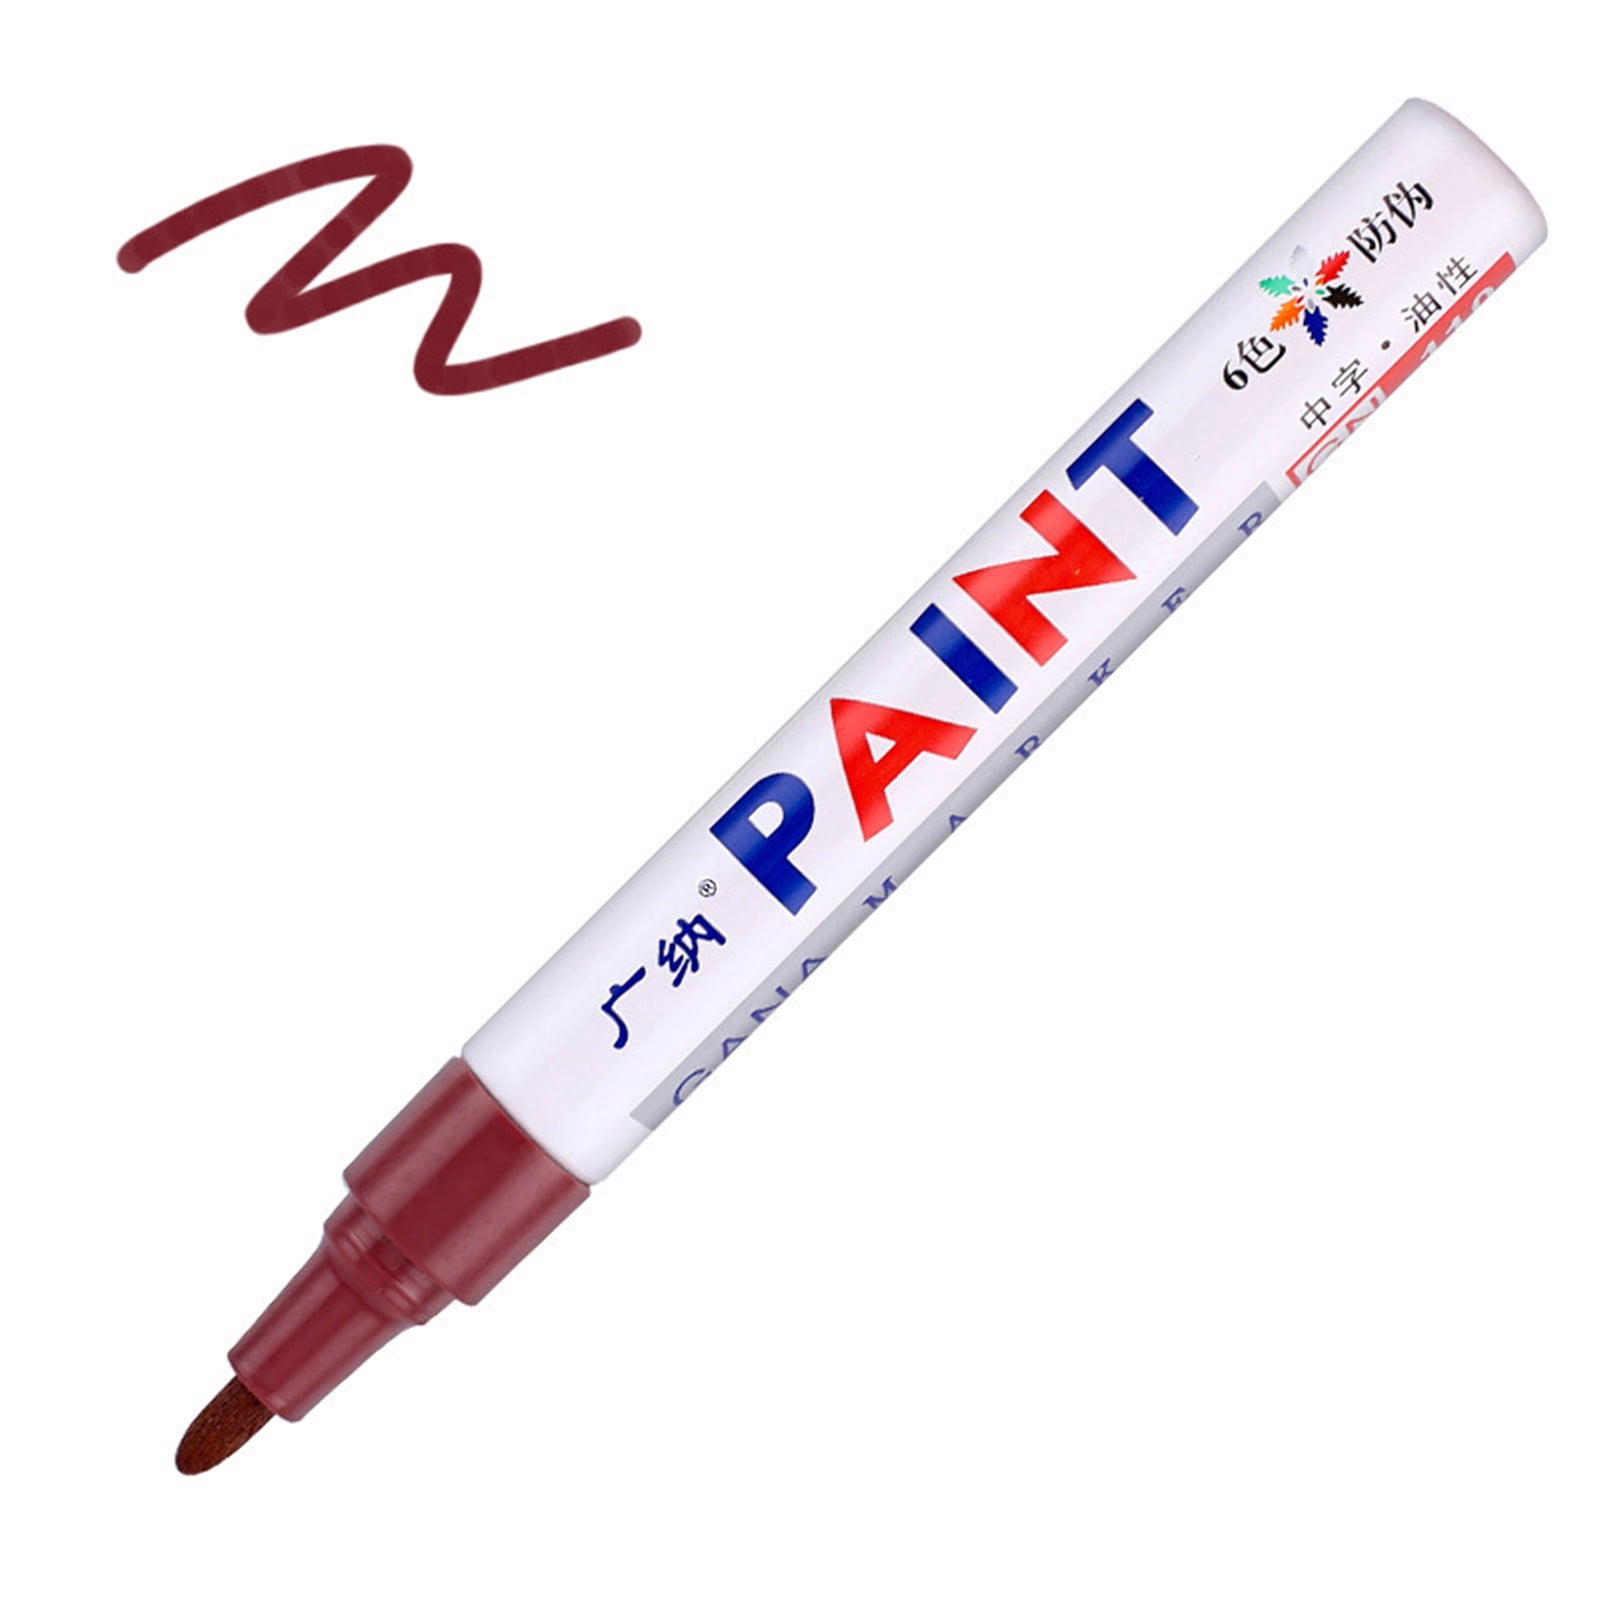 sipa paint marker sp-110, furniture use